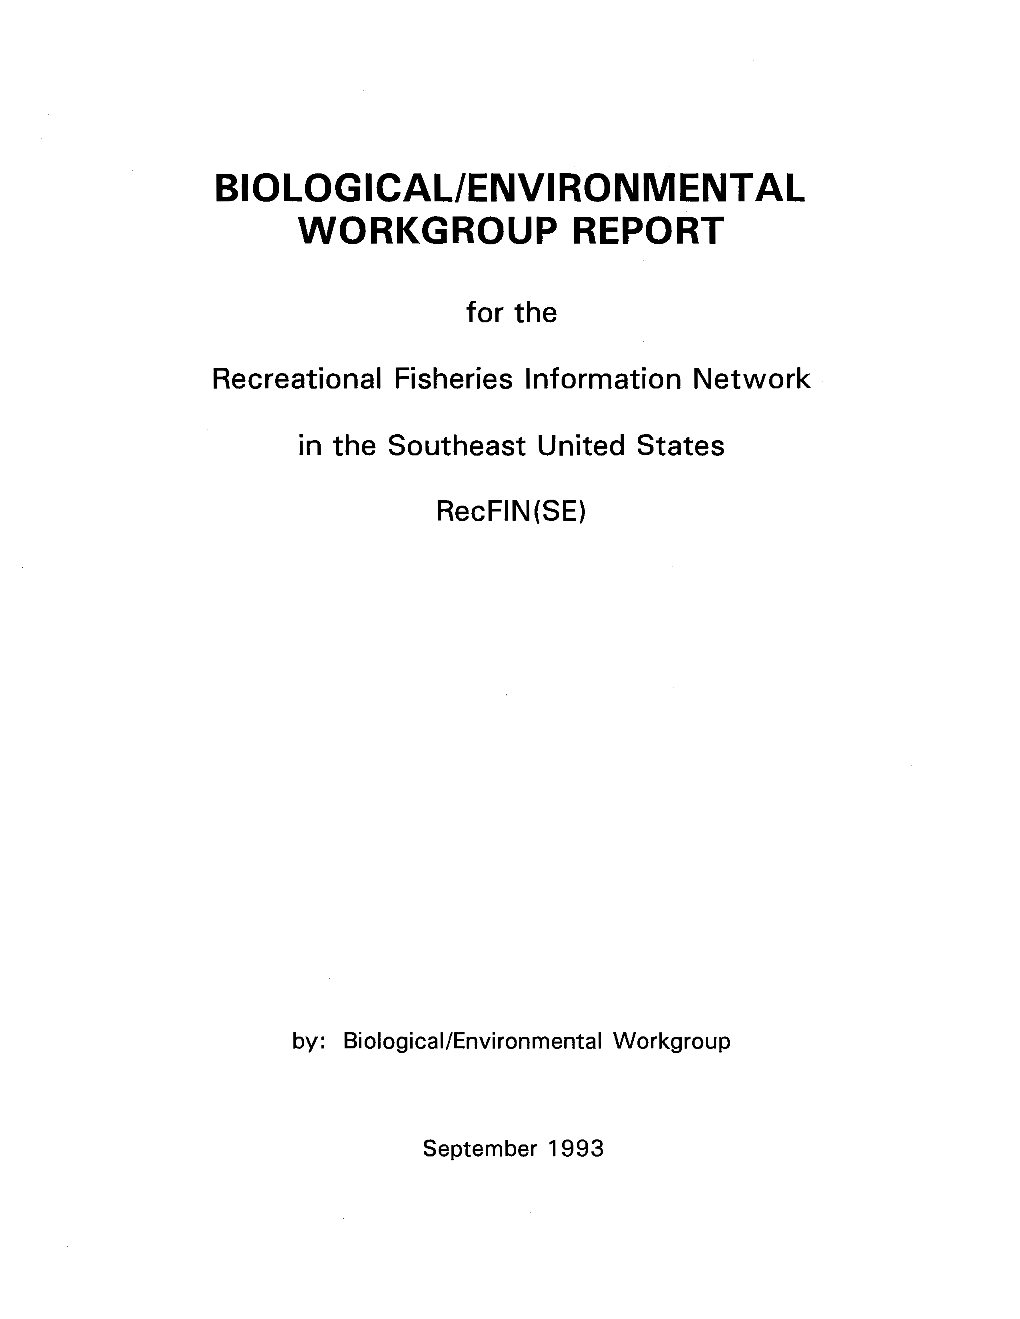 Biological Environmental Workgroup Report for the RECFIN 1993